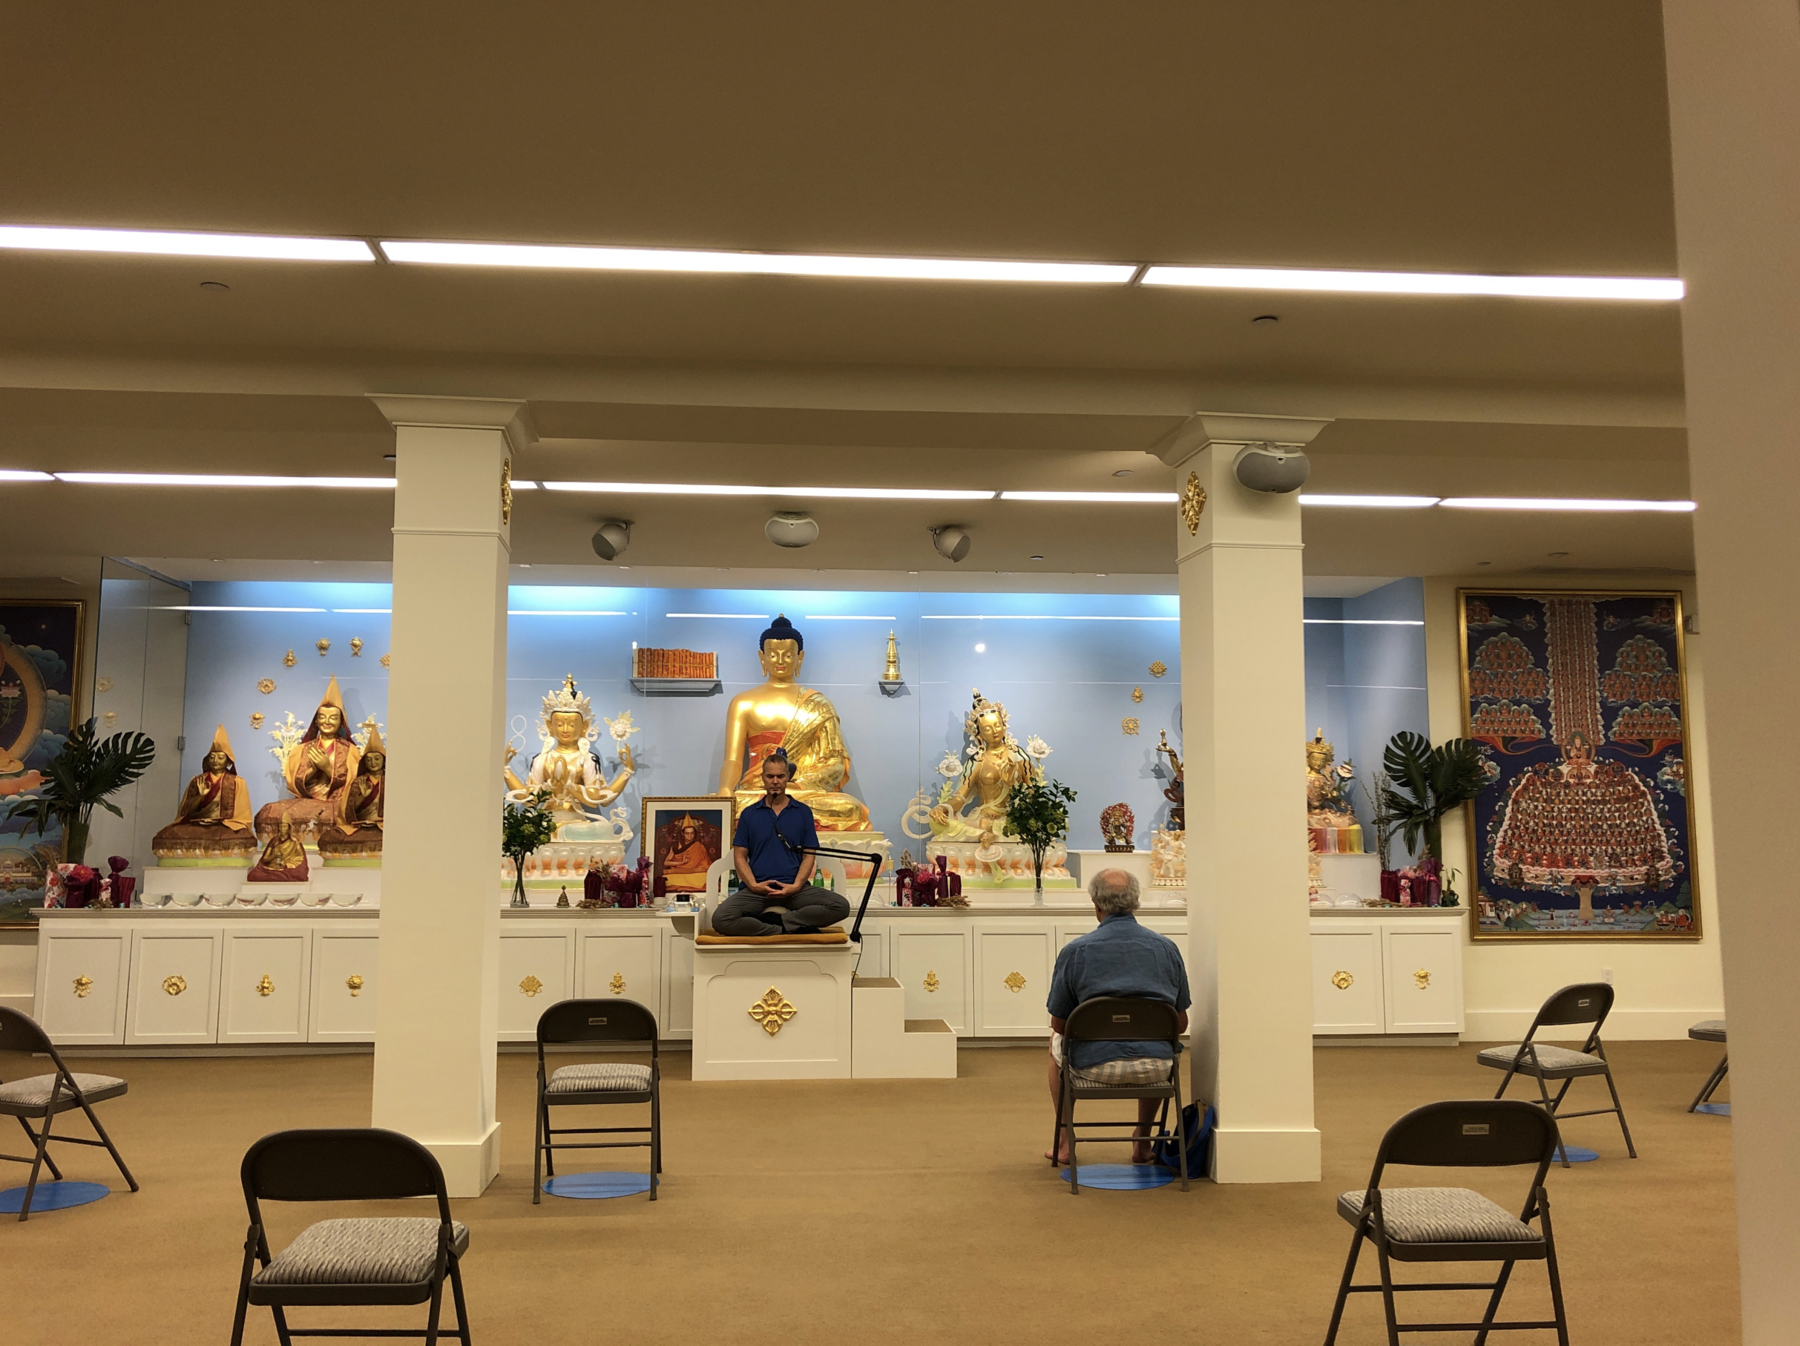 kadampa-nyc-covid-safety-guidelines